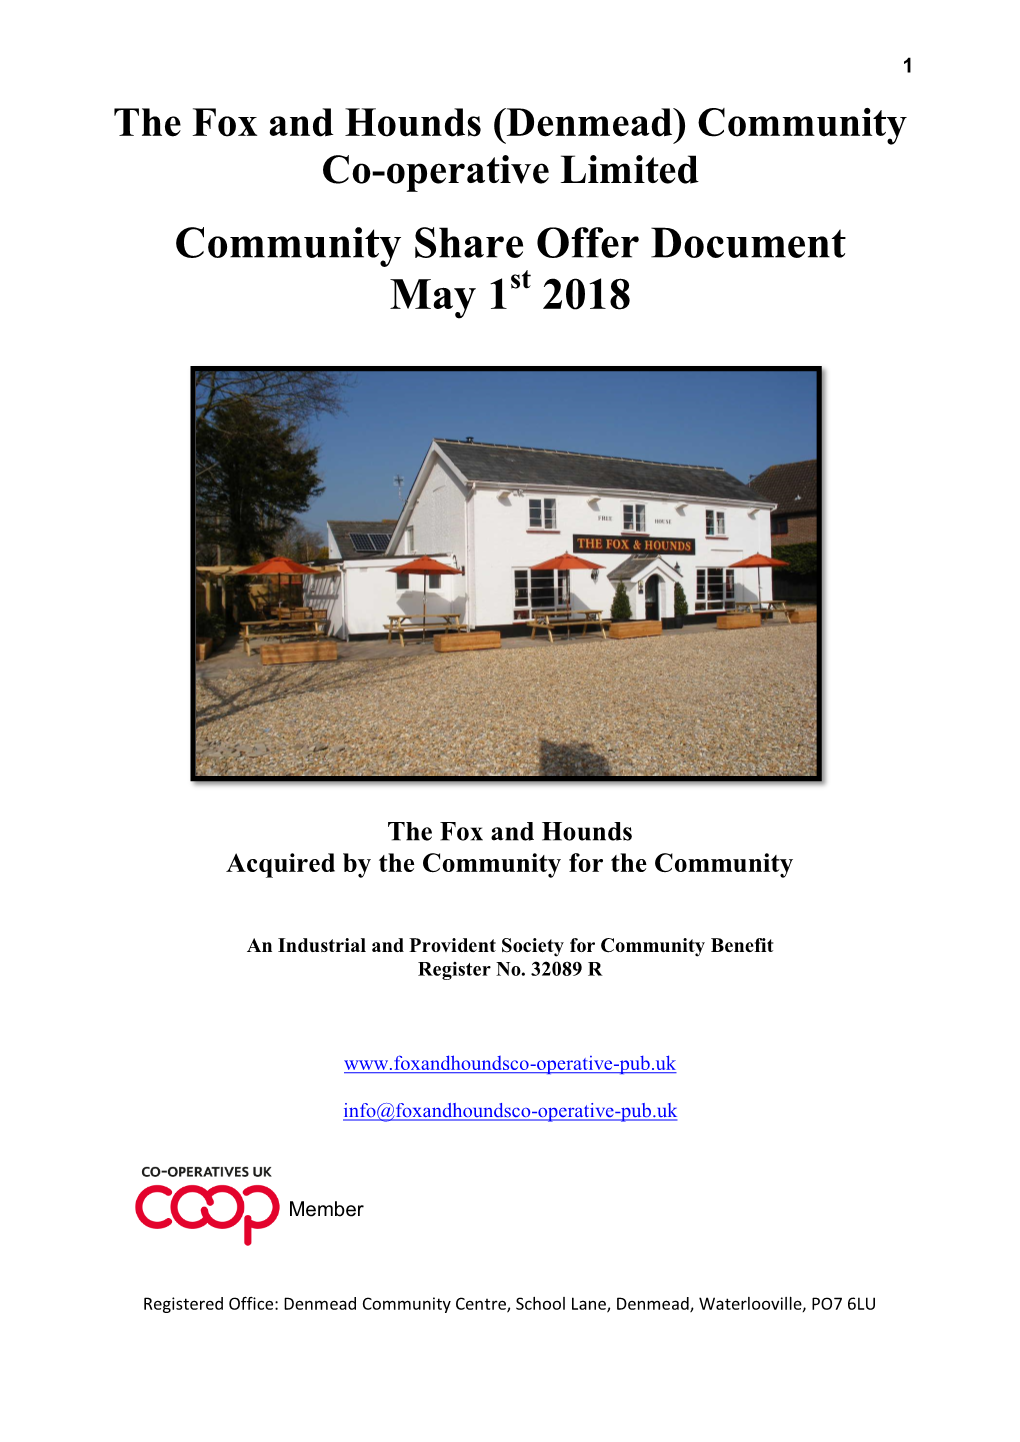 The Fox and Hounds (Denmead) Community Co-Operative Limited